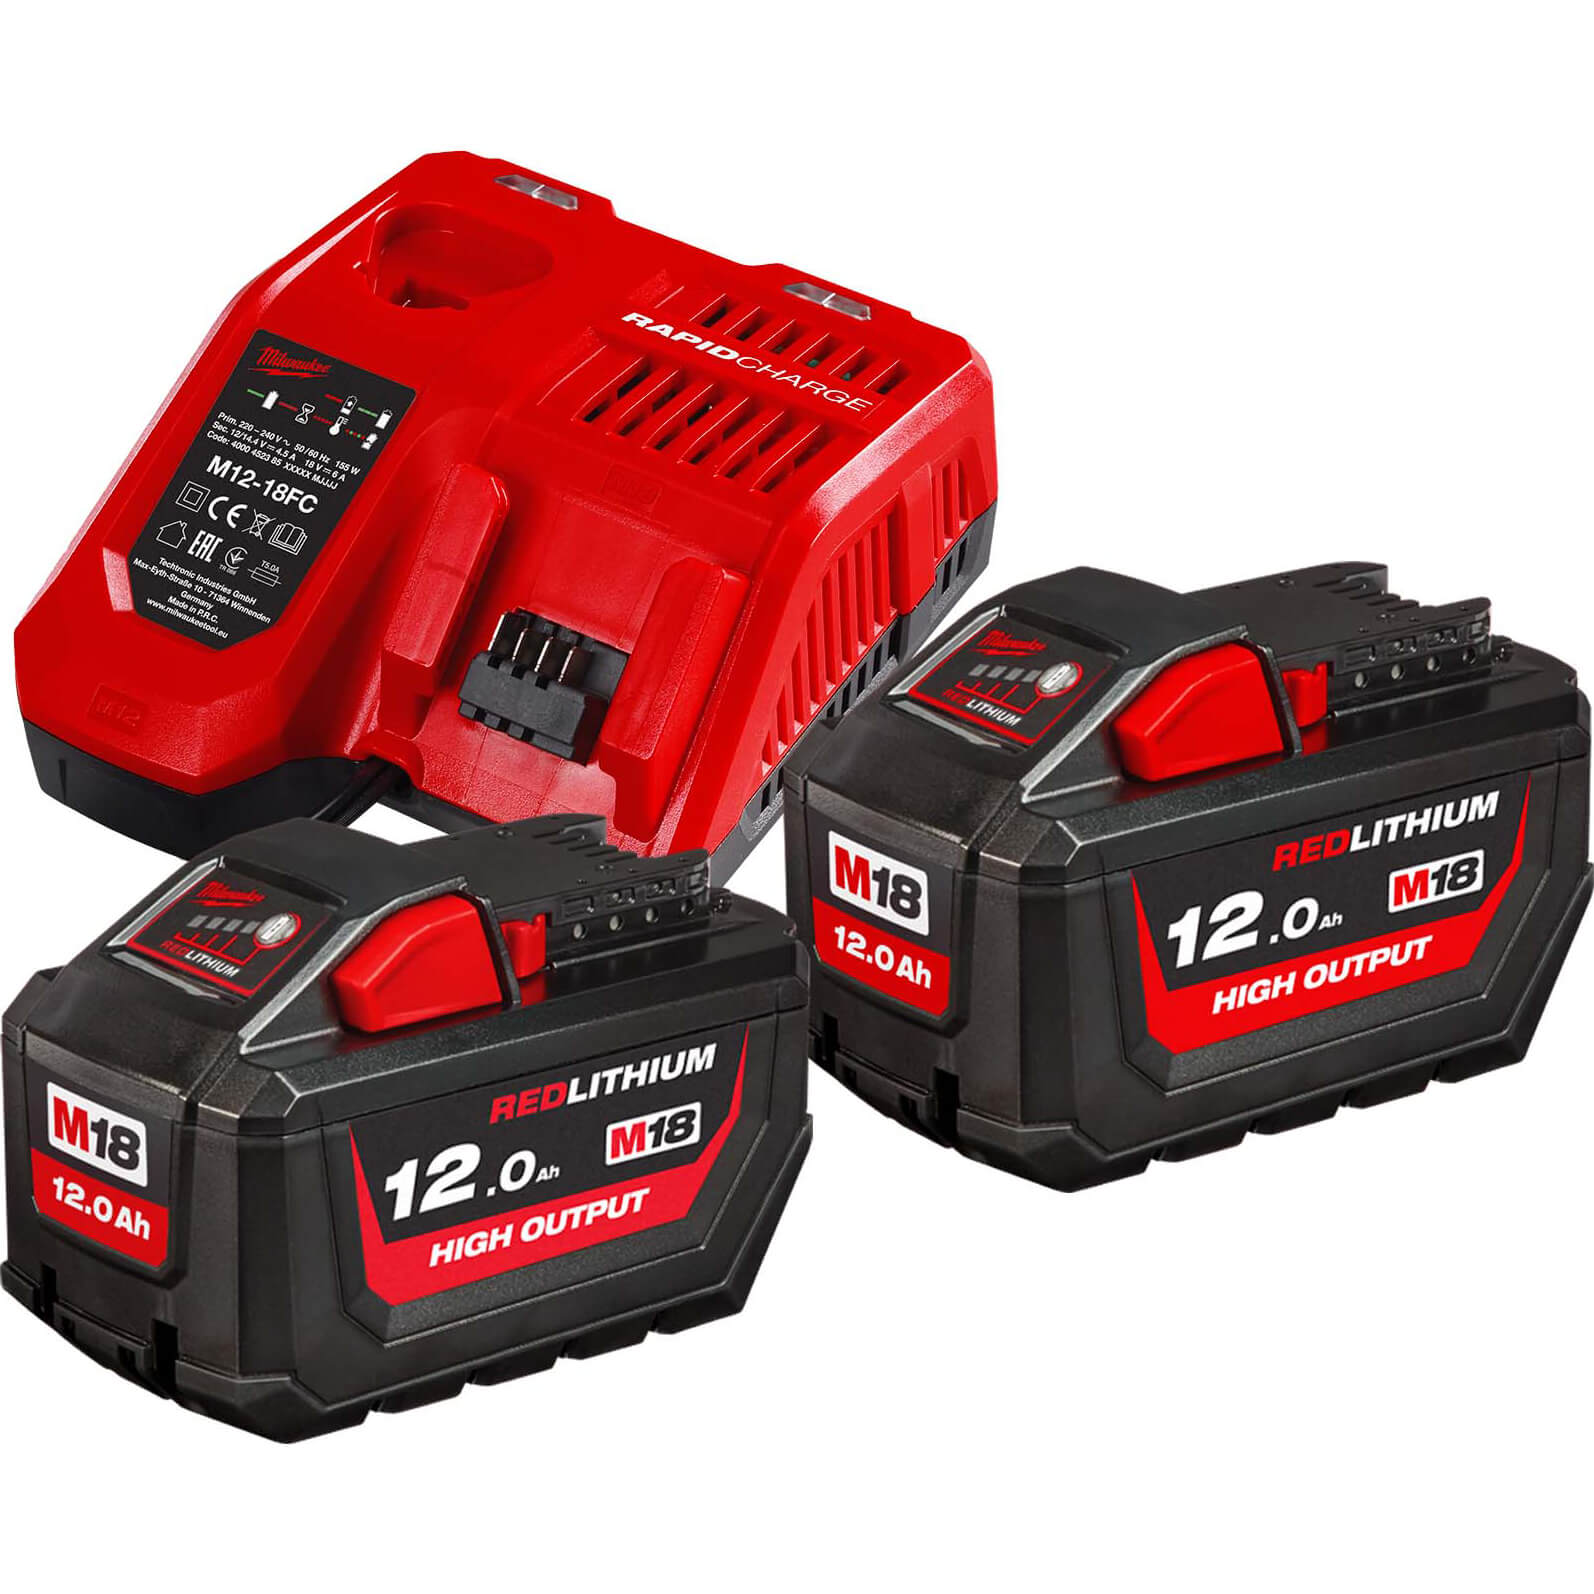 Image of Milwaukee M18 HNRG 18v Cordless Battery Charger and Twin 12ah Batteries 12ah